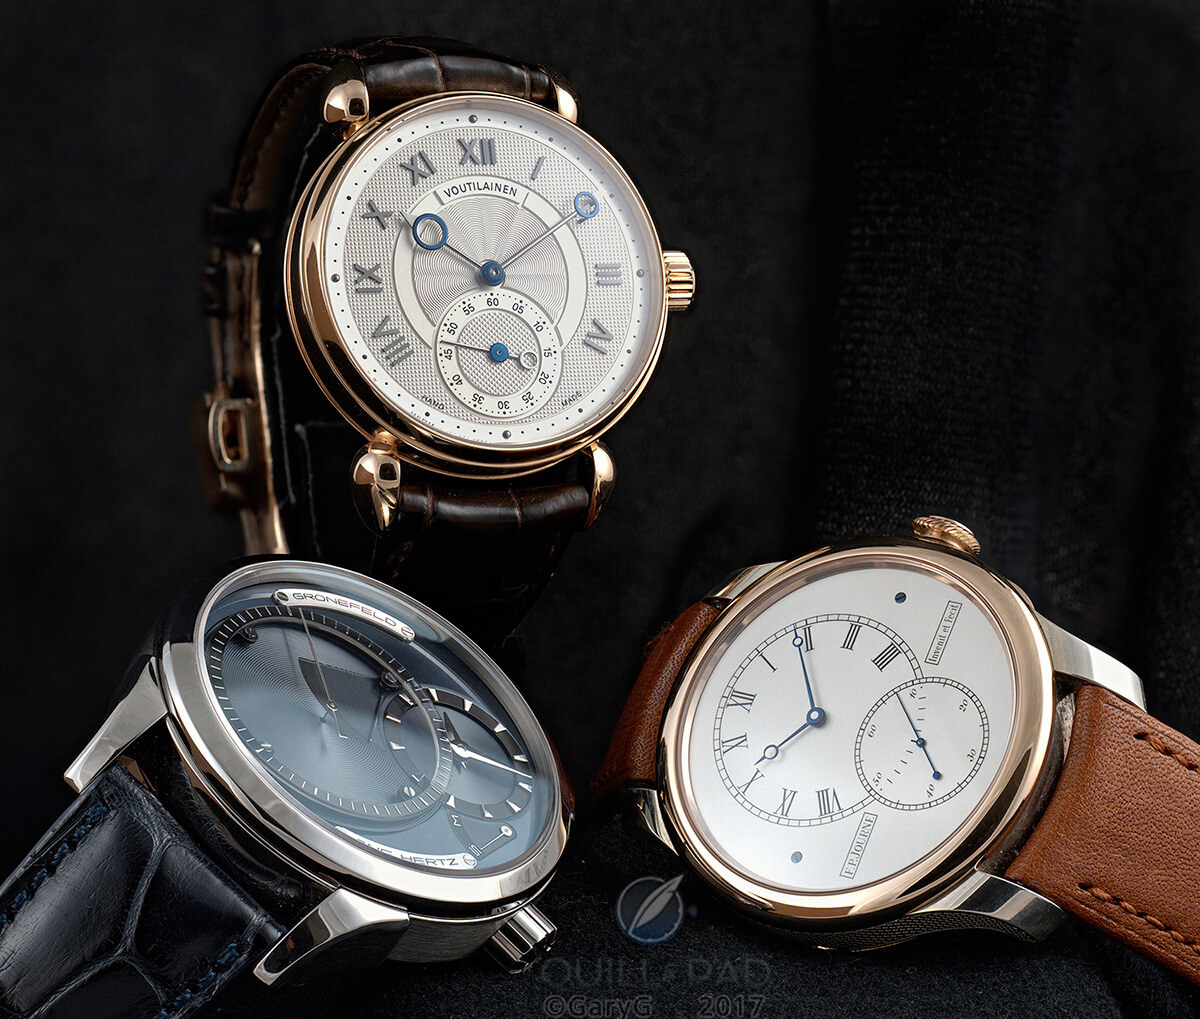 Worth it? Pieces sold to afford a Greubel Forsey